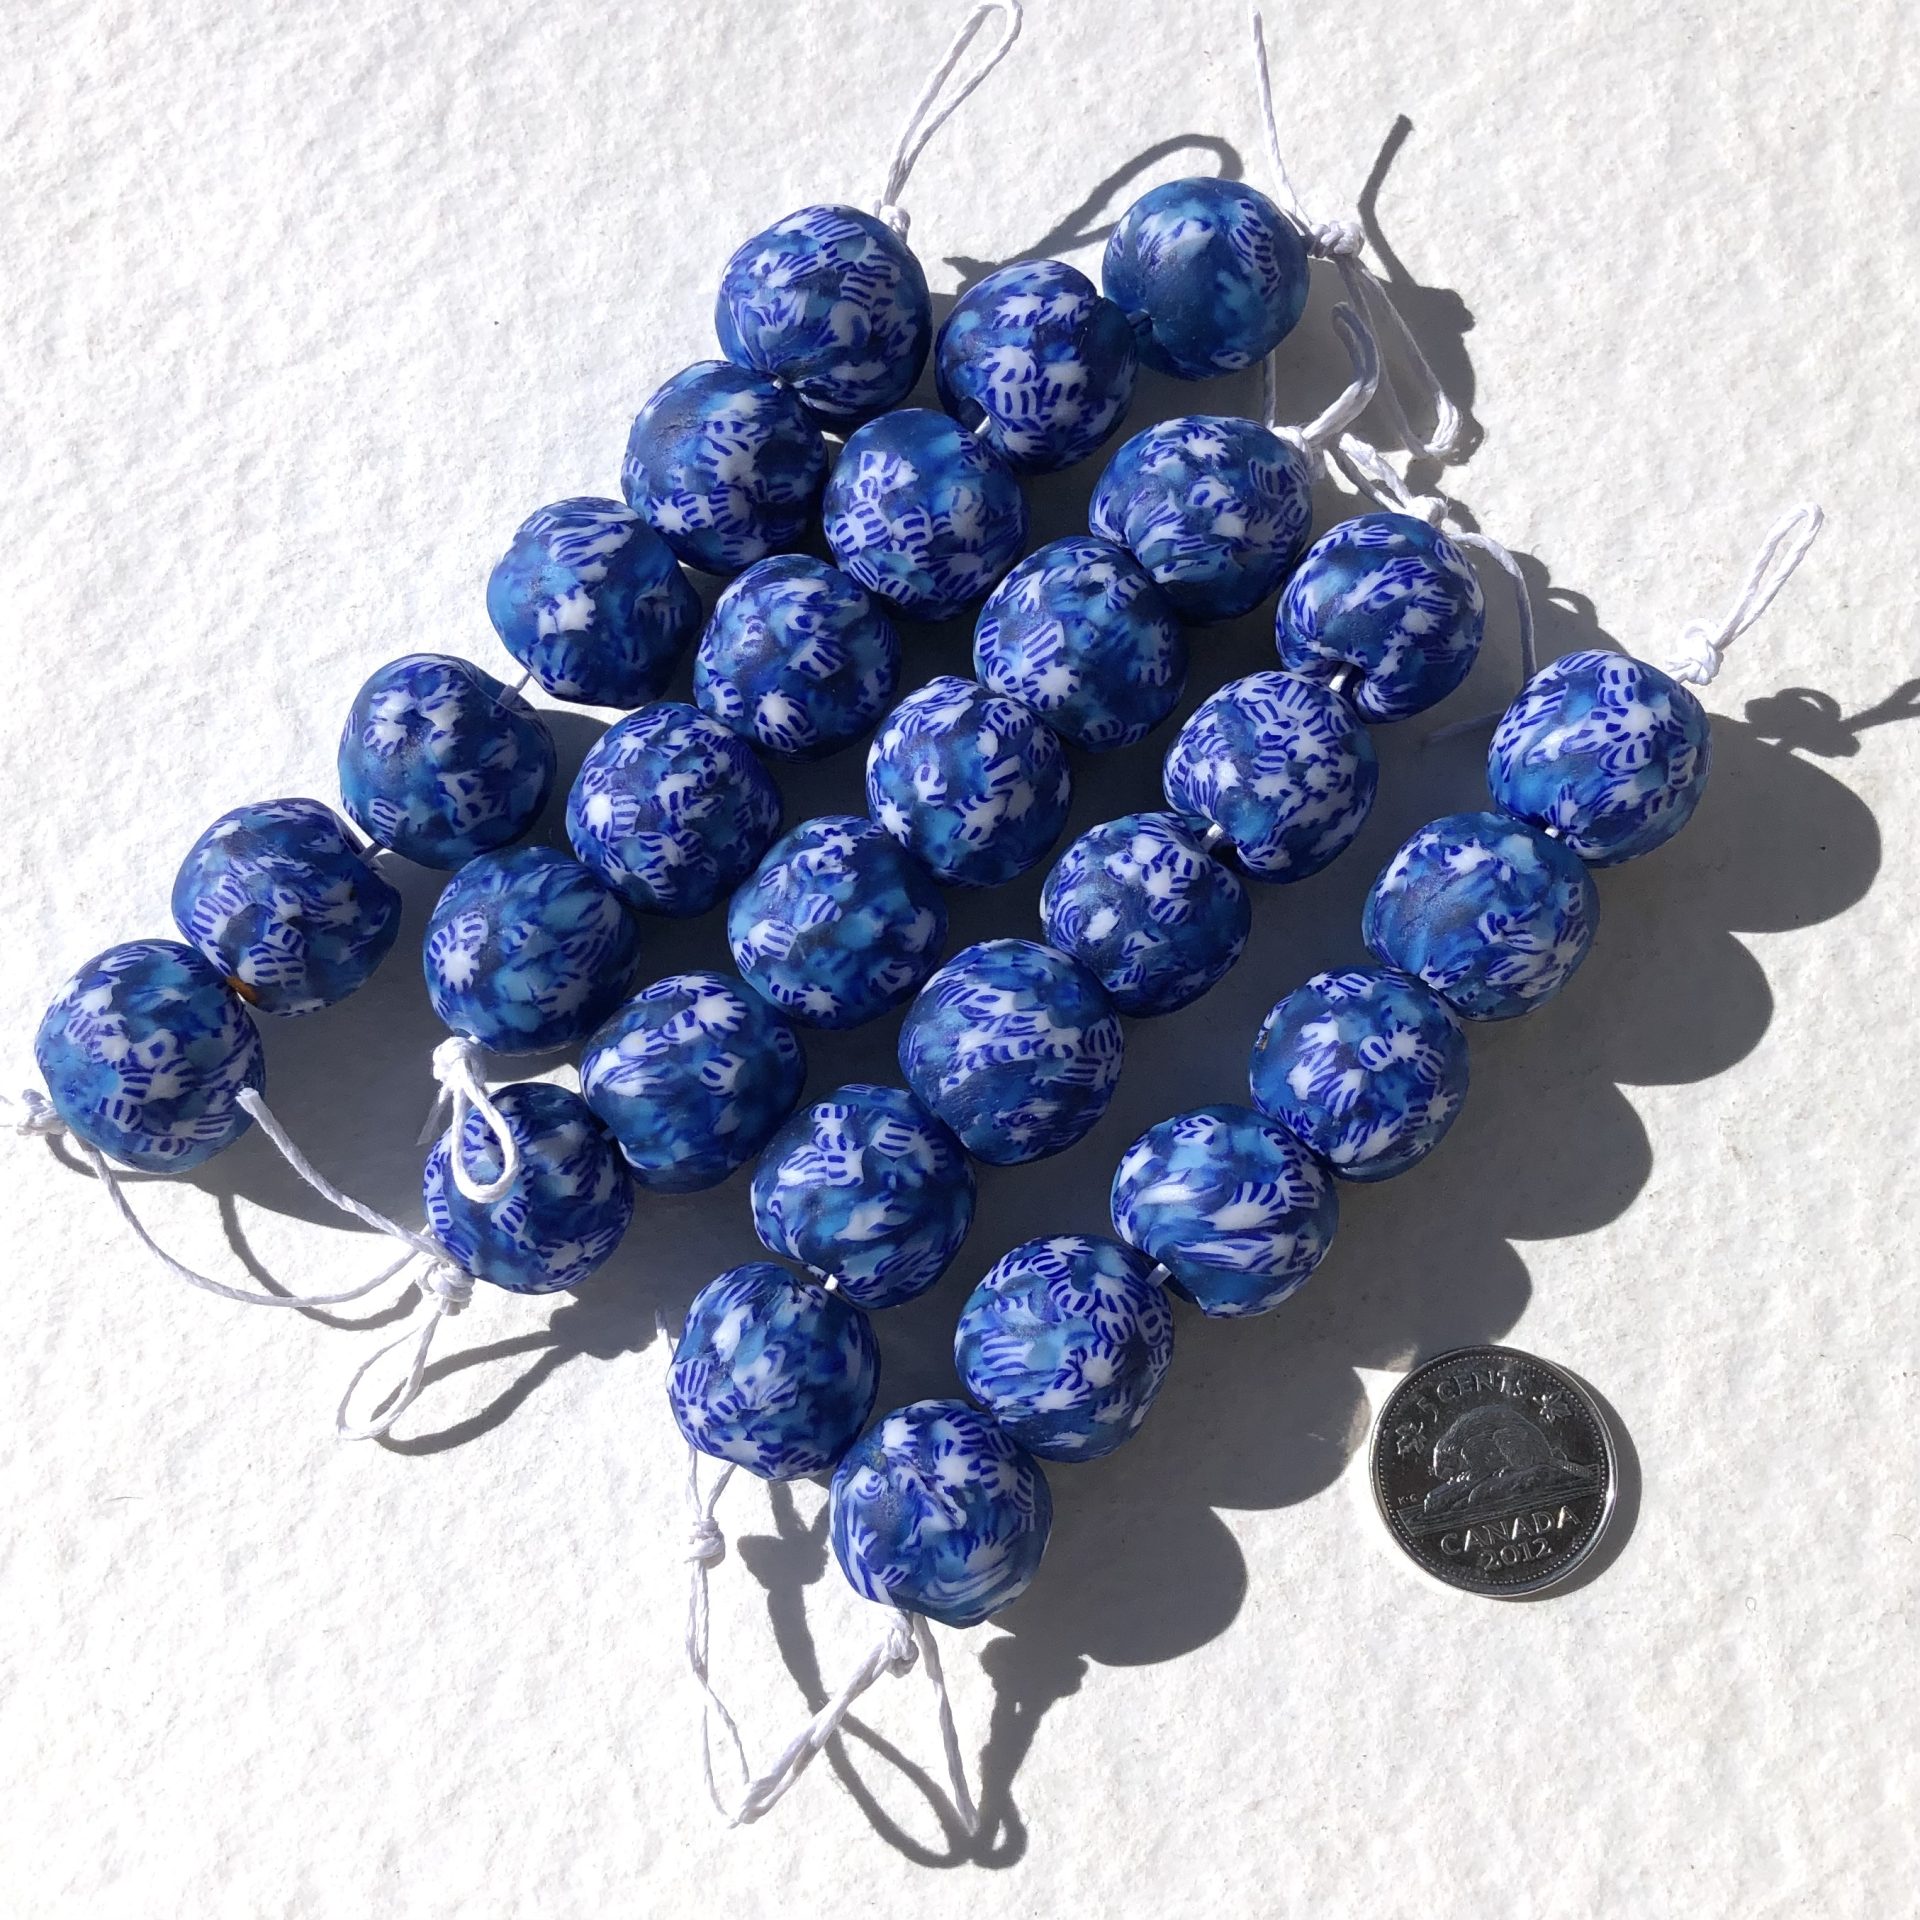 Size 6 Fused Recycled Glass Beads